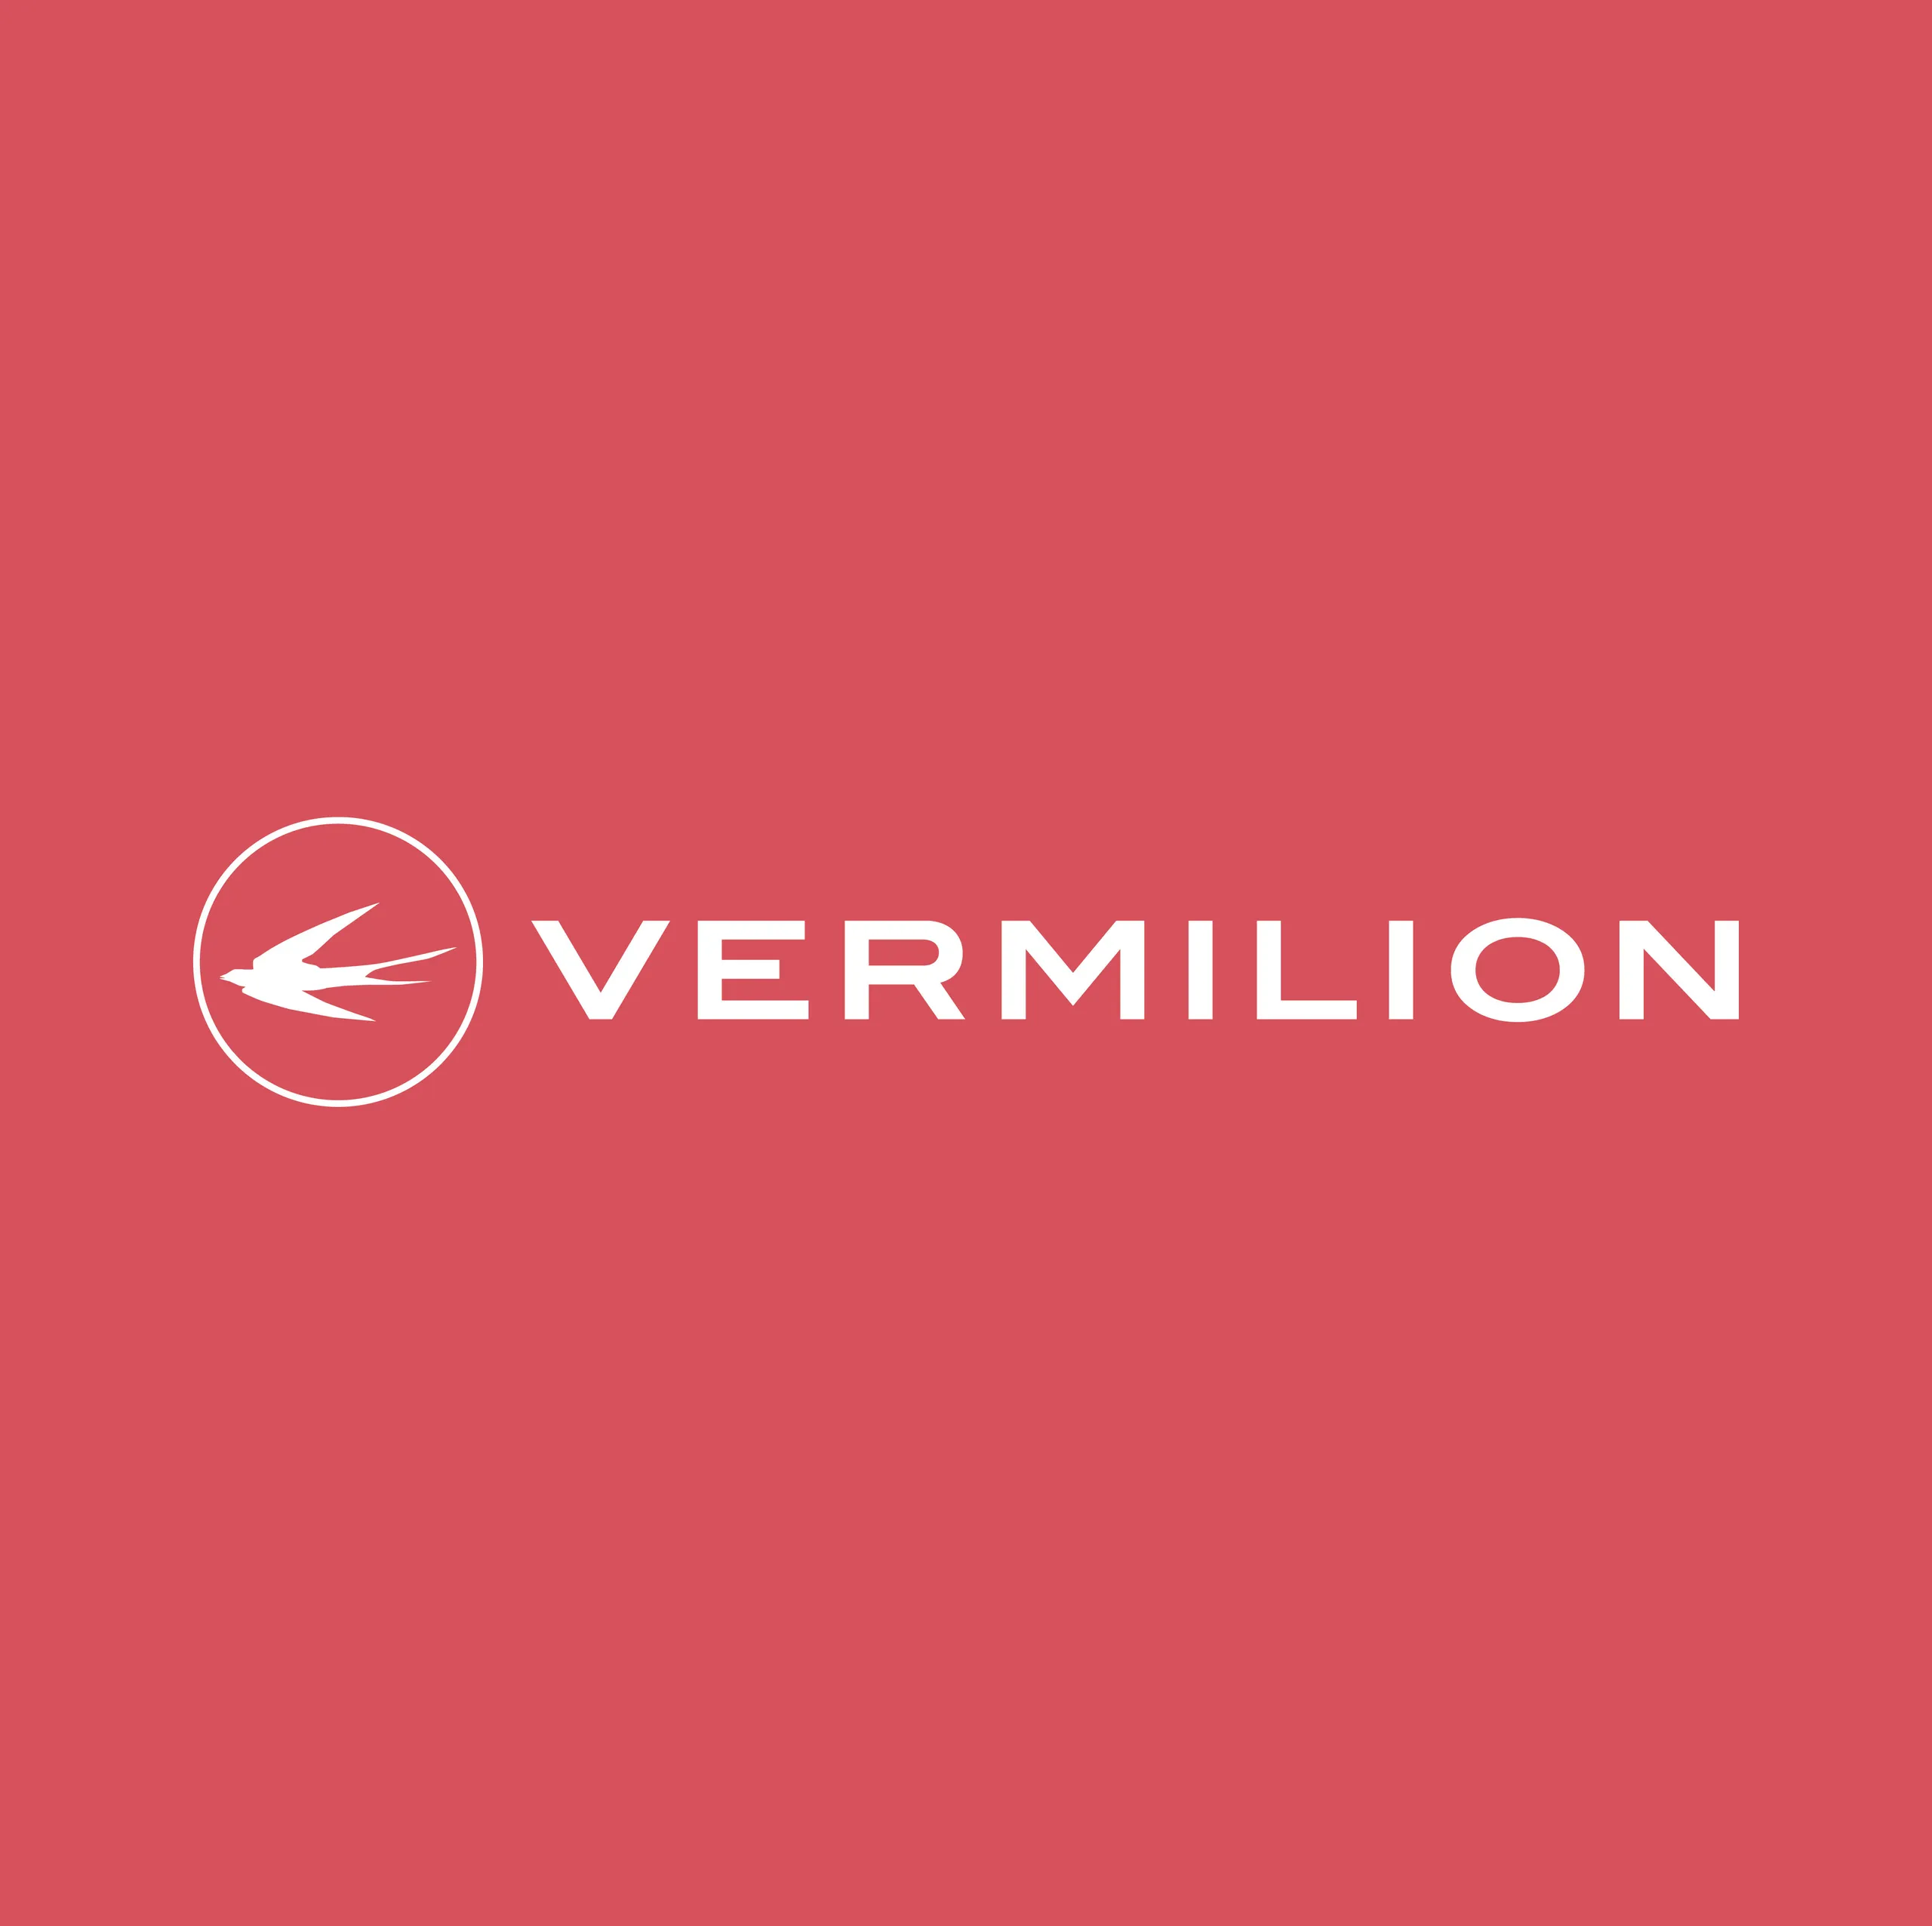 Vermilion horizontal logo lockup in white on a red field